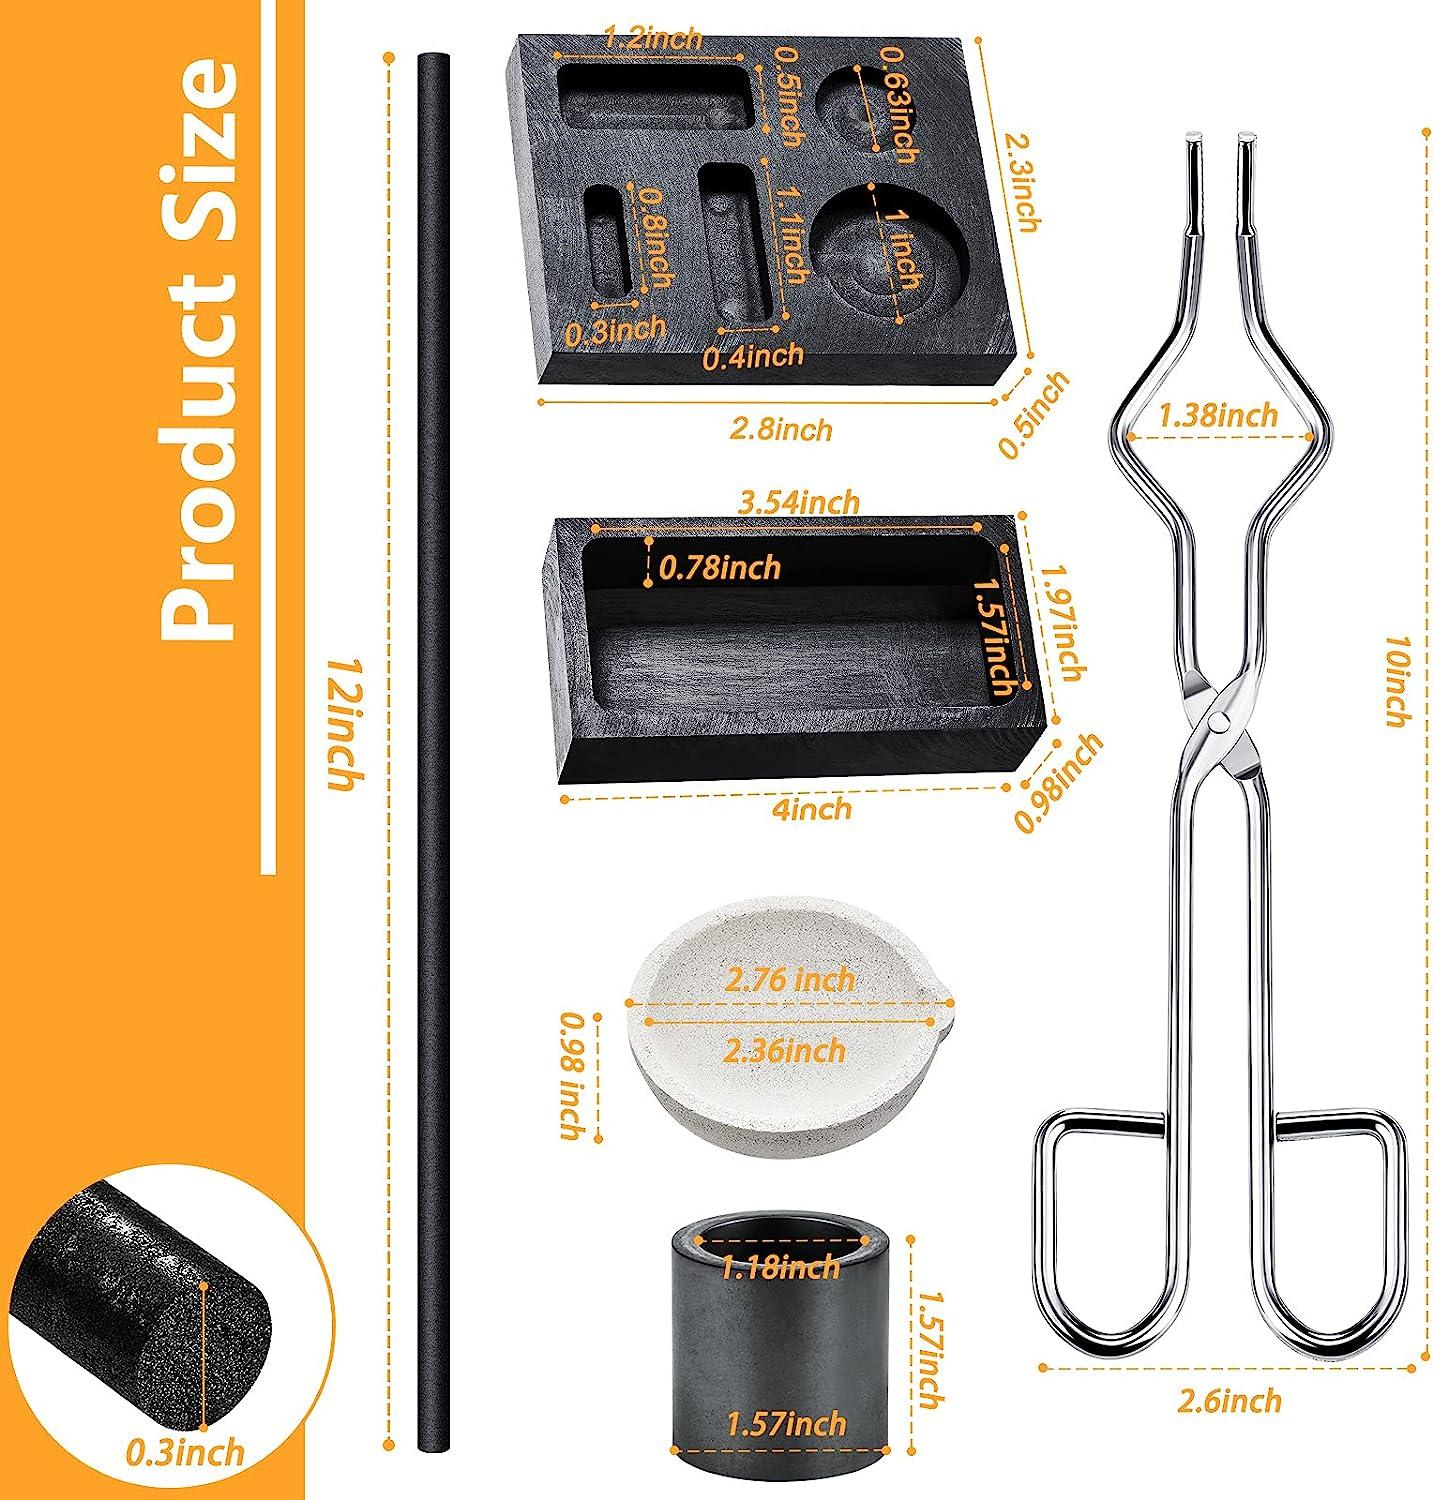 7 Pieces Graphite Torch Melting Casting Kit, Including 2 Graphite Crucible  Stir Stick, Graphite Casting Mould 5-in-1 Graphite Casting Ingot Mould,  Quartz Crucible, Cylindrical Graphite, Tong for Melt